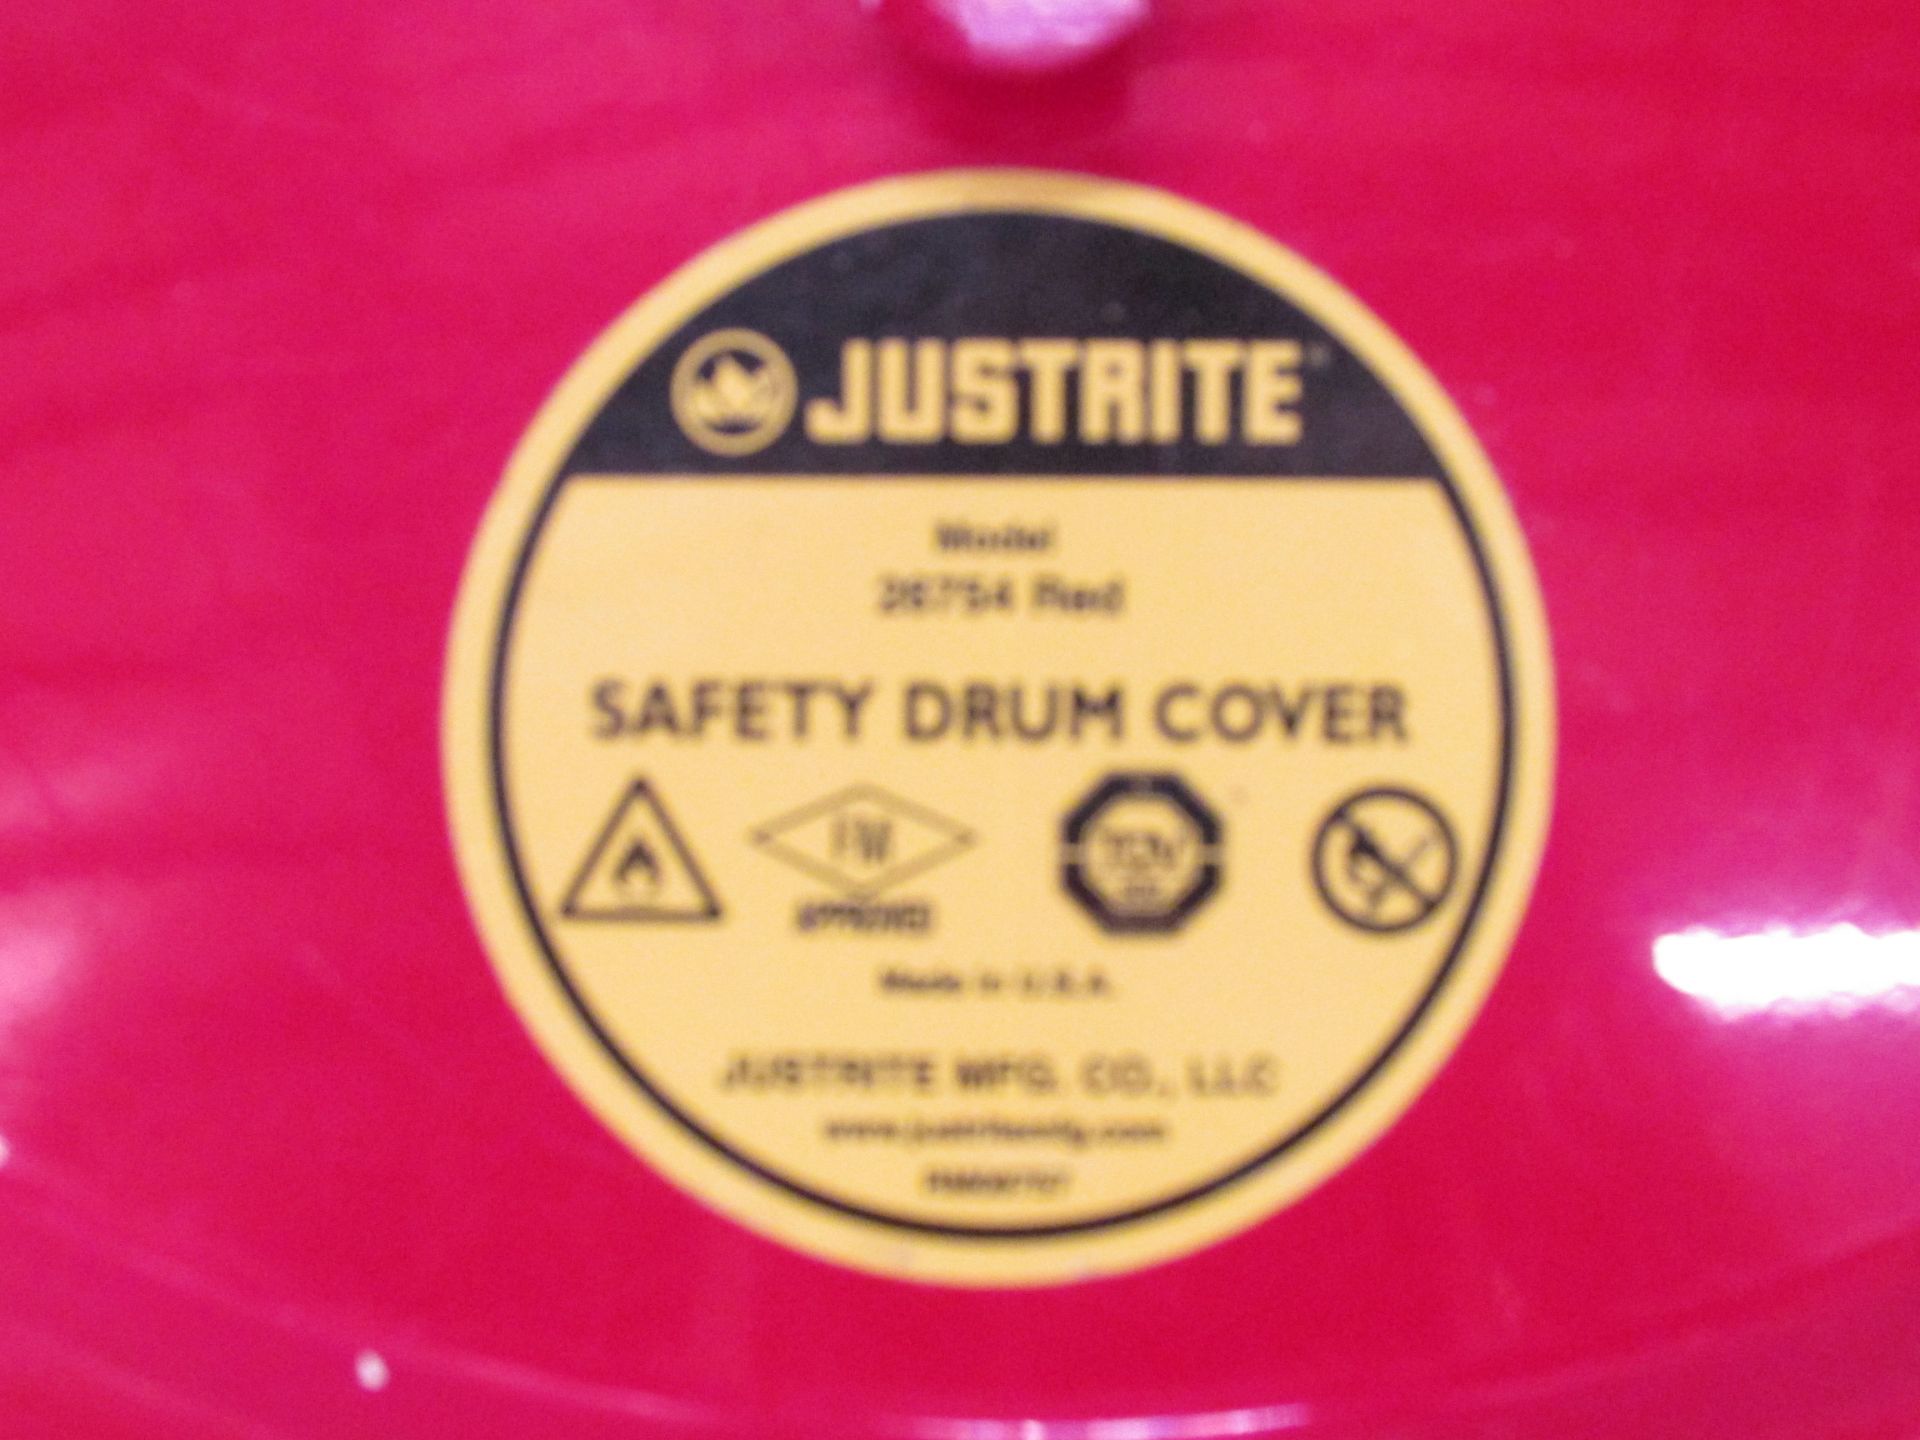 Lot of (4) Justrite m/n 26754 locking safety drum covers - Image 4 of 4